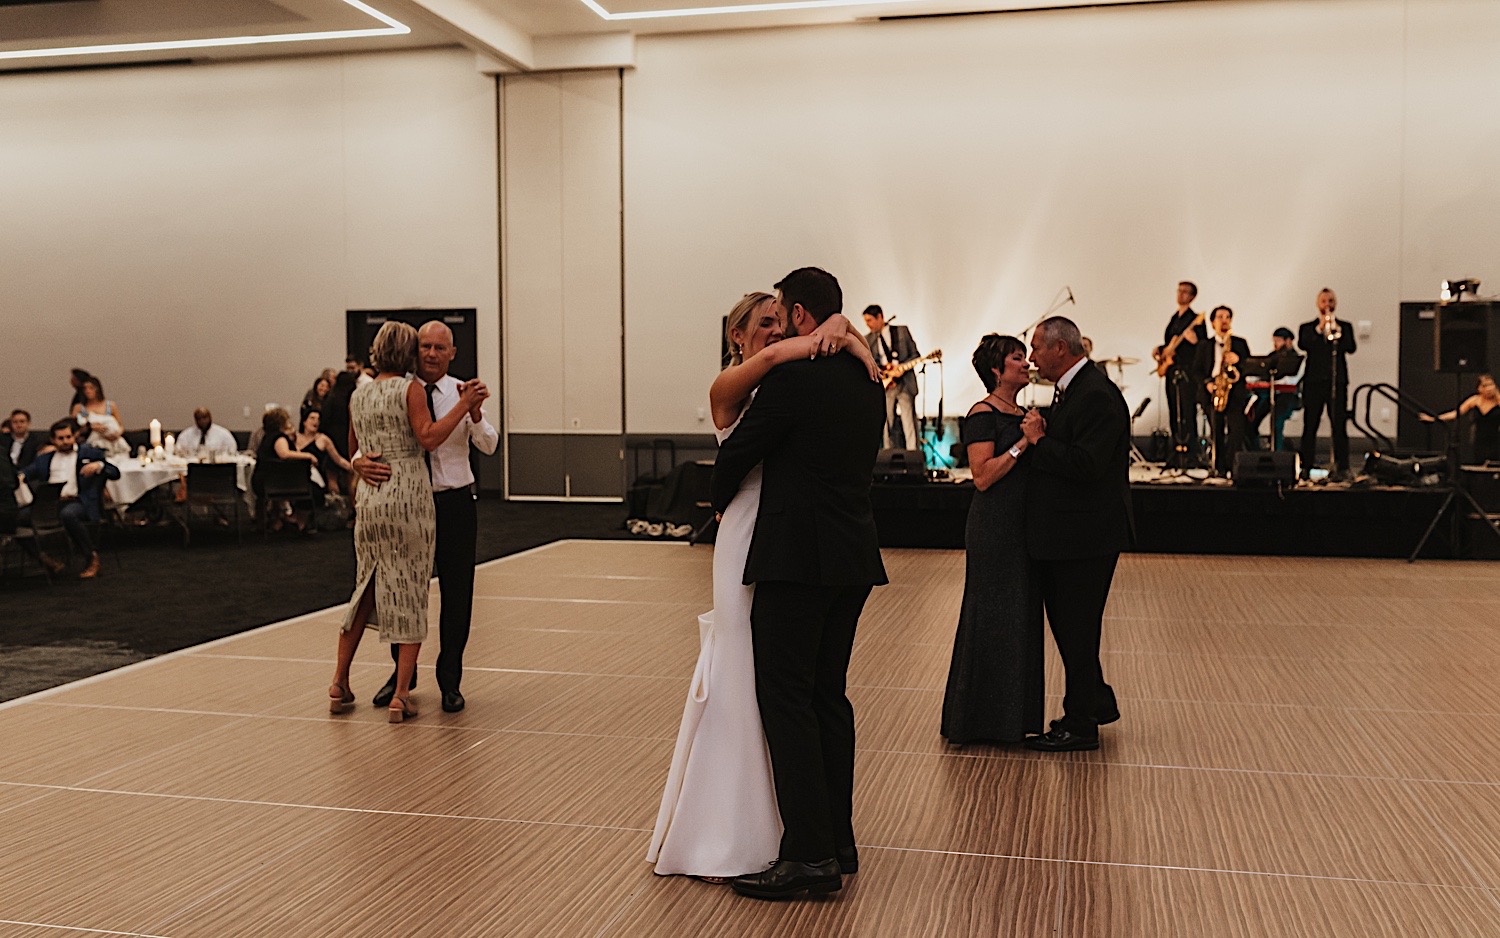 A bride and groom dance together with their parents dancing together on either side of  them during their wedding reception at the La Crosse Center